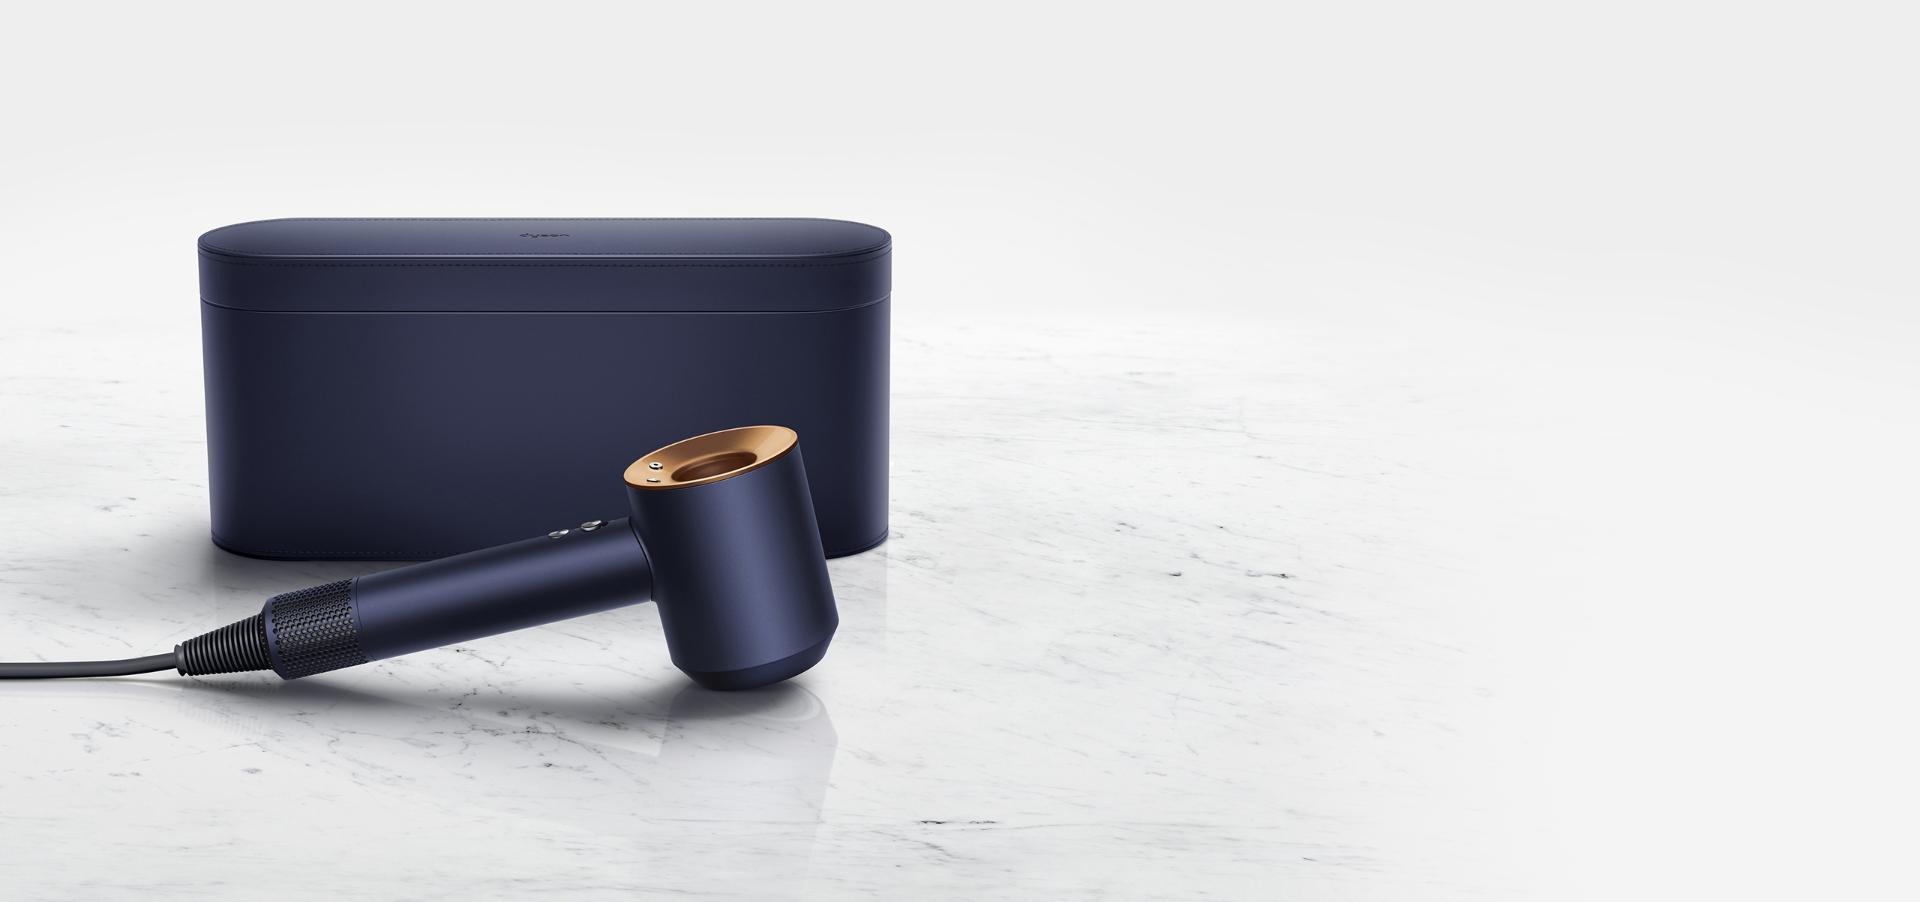 Special edition Dyson Supersonic hair dryer and presentation case